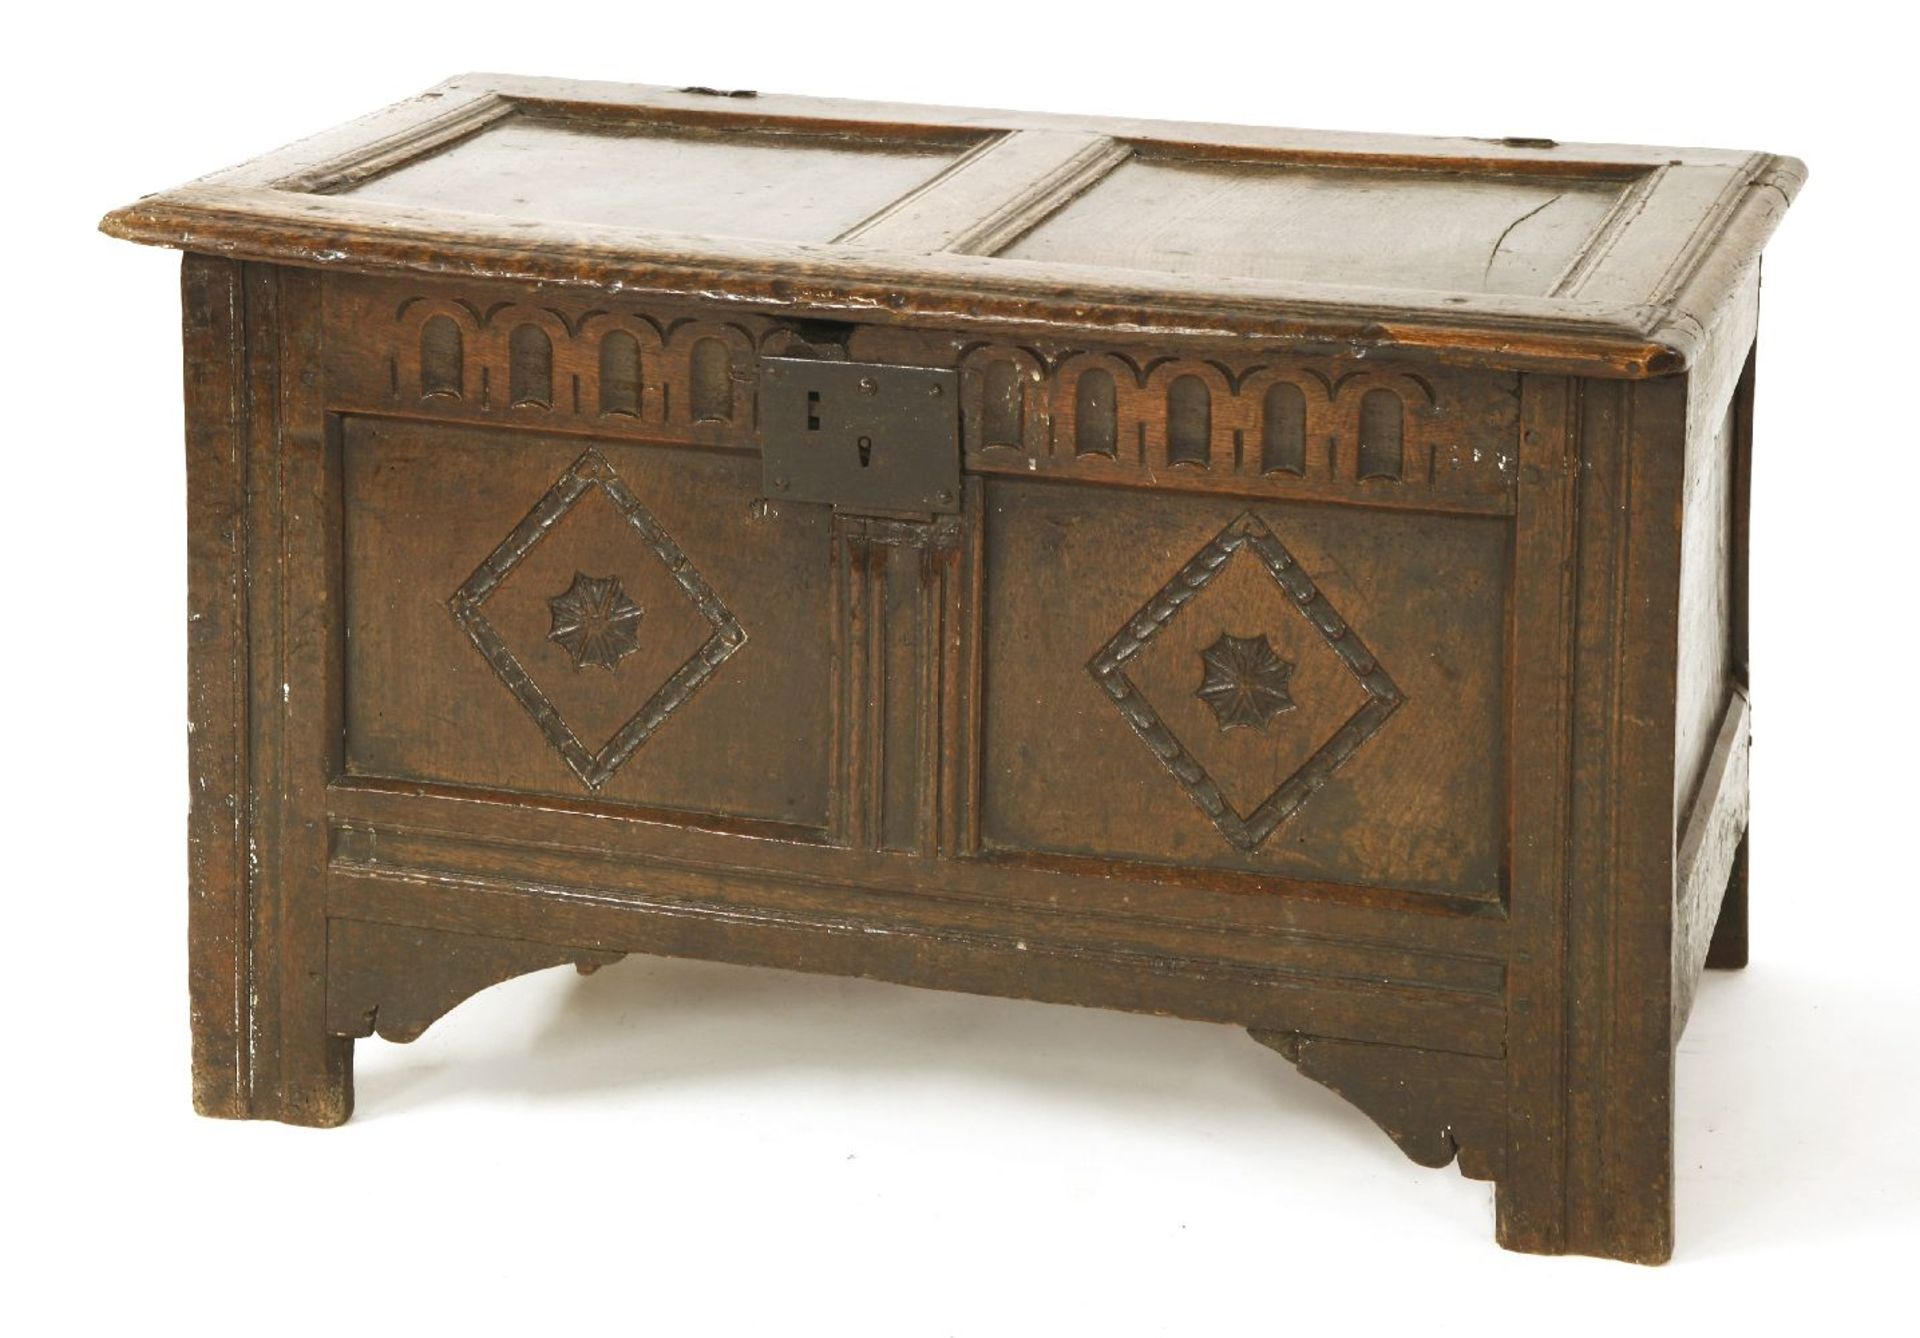 A small oak coffer, 17th century, with a twin panel lid and carved front,90cm wide51cm deep55cm